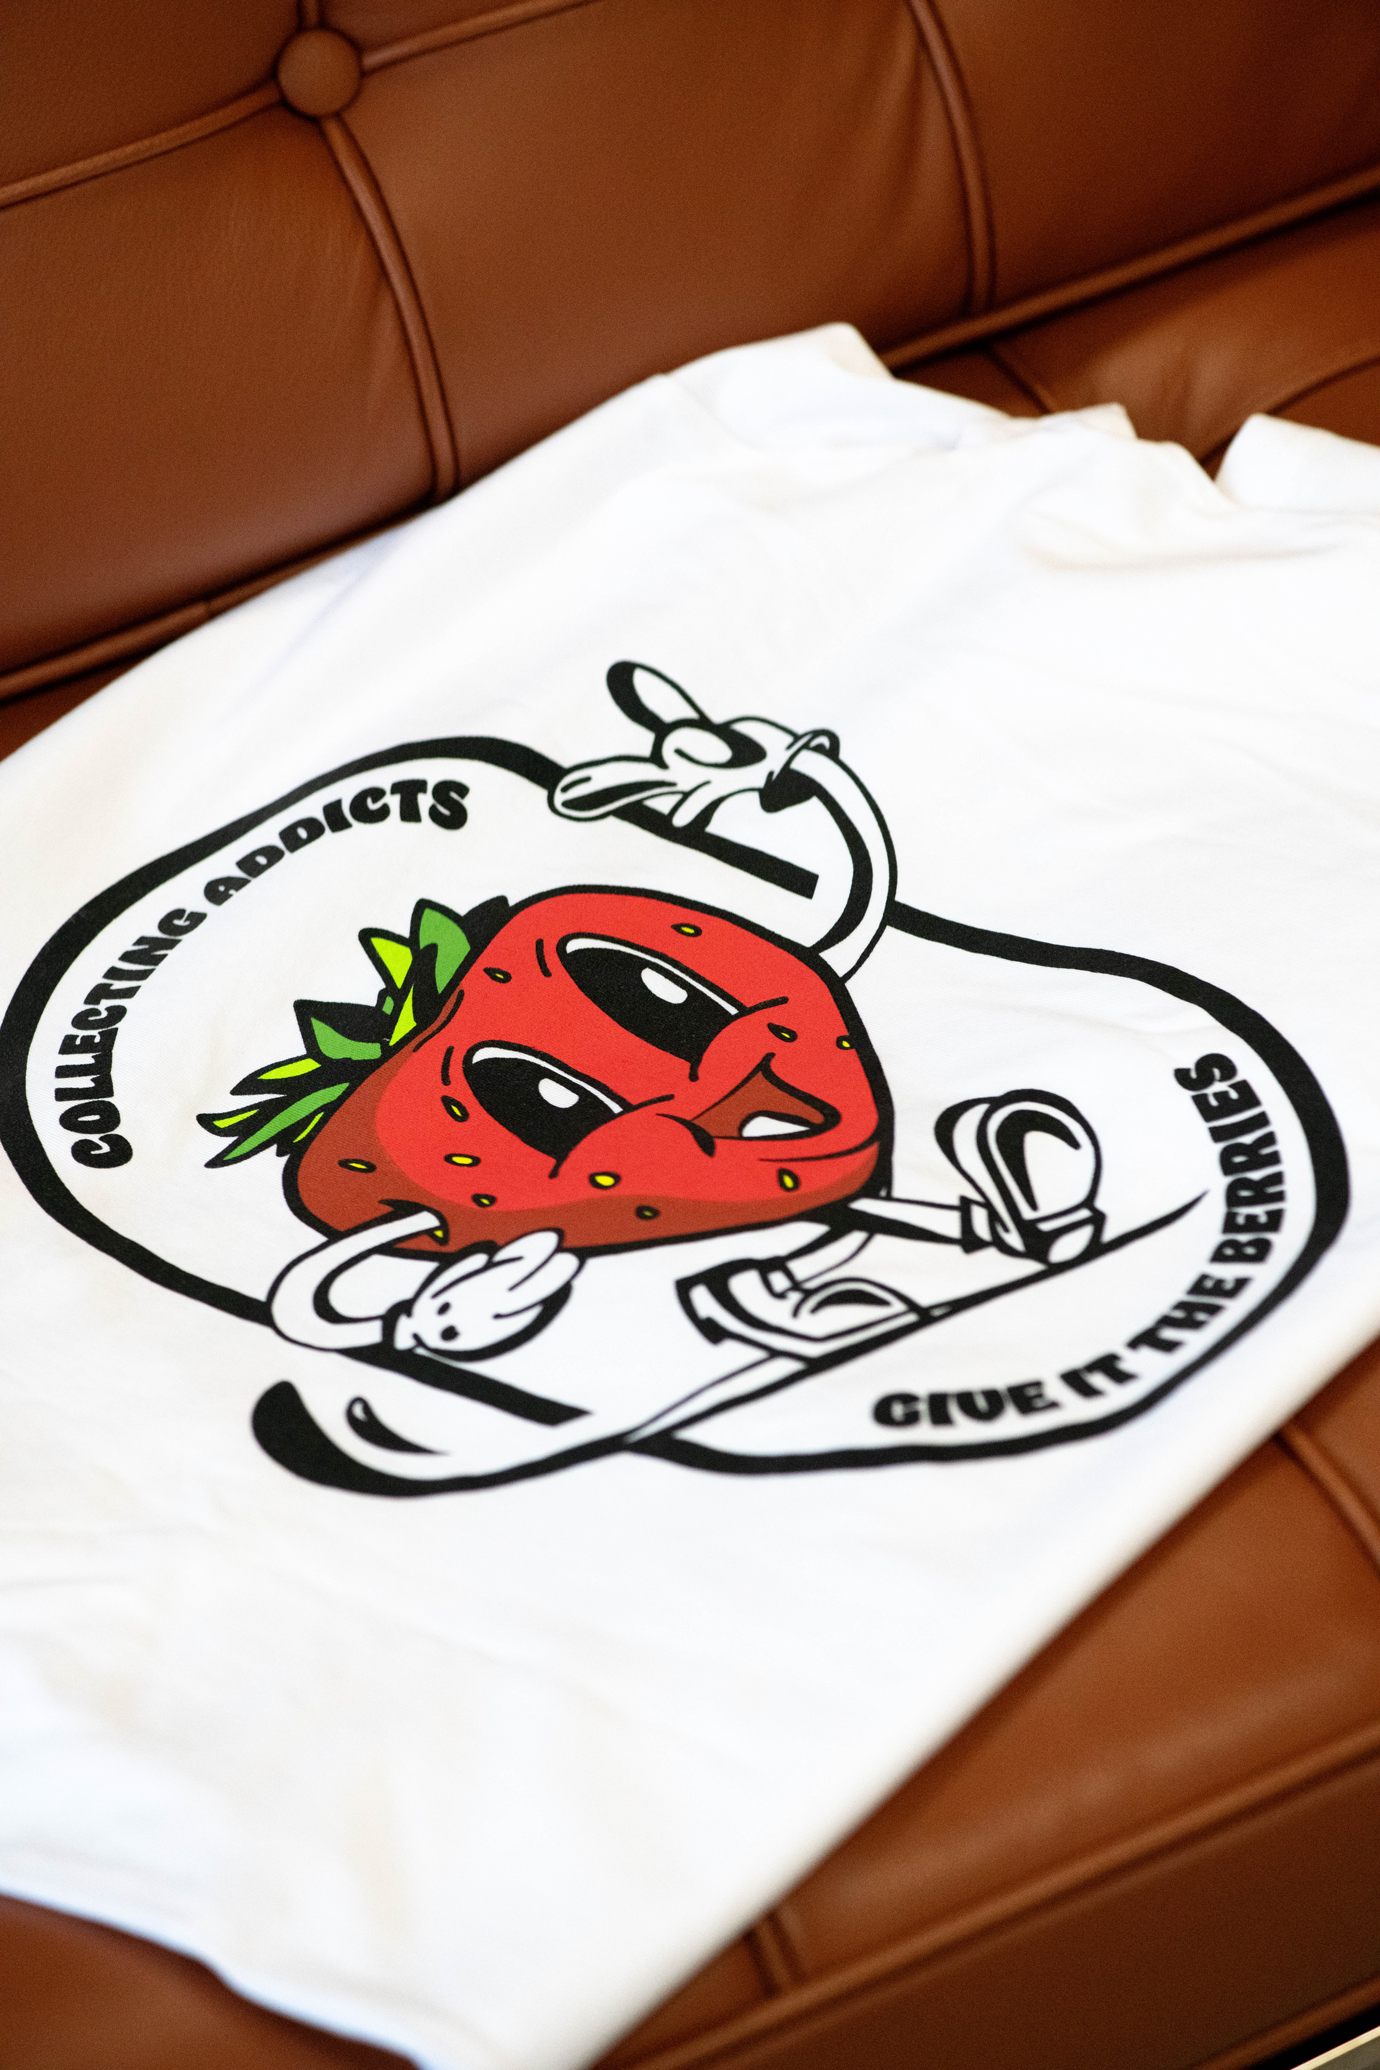 'Give it the Berries' T-Shirt